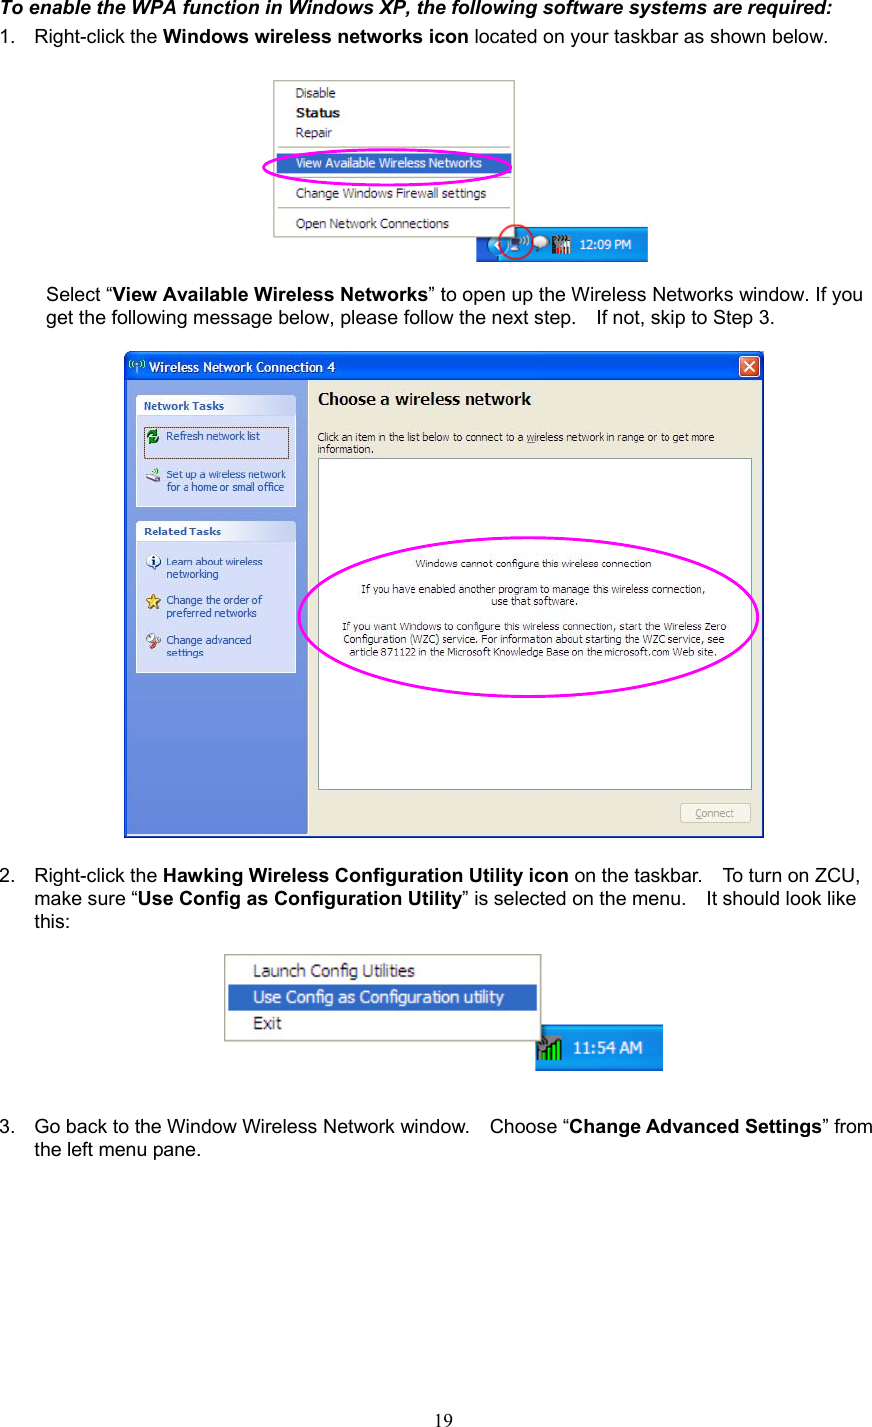  19 To enable the WPA function in Windows XP, the following software systems are required: 1. Right-click the Windows wireless networks icon located on your taskbar as shown below.     Select “View Available Wireless Networks” to open up the Wireless Networks window. If you get the following message below, please follow the next step.    If not, skip to Step 3.    2. Right-click the Hawking Wireless Configuration Utility icon on the taskbar.    To turn on ZCU, make sure “Use Config as Configuration Utility” is selected on the menu.    It should look like this:     3.  Go back to the Window Wireless Network window.    Choose “Change Advanced Settings” from the left menu pane. 